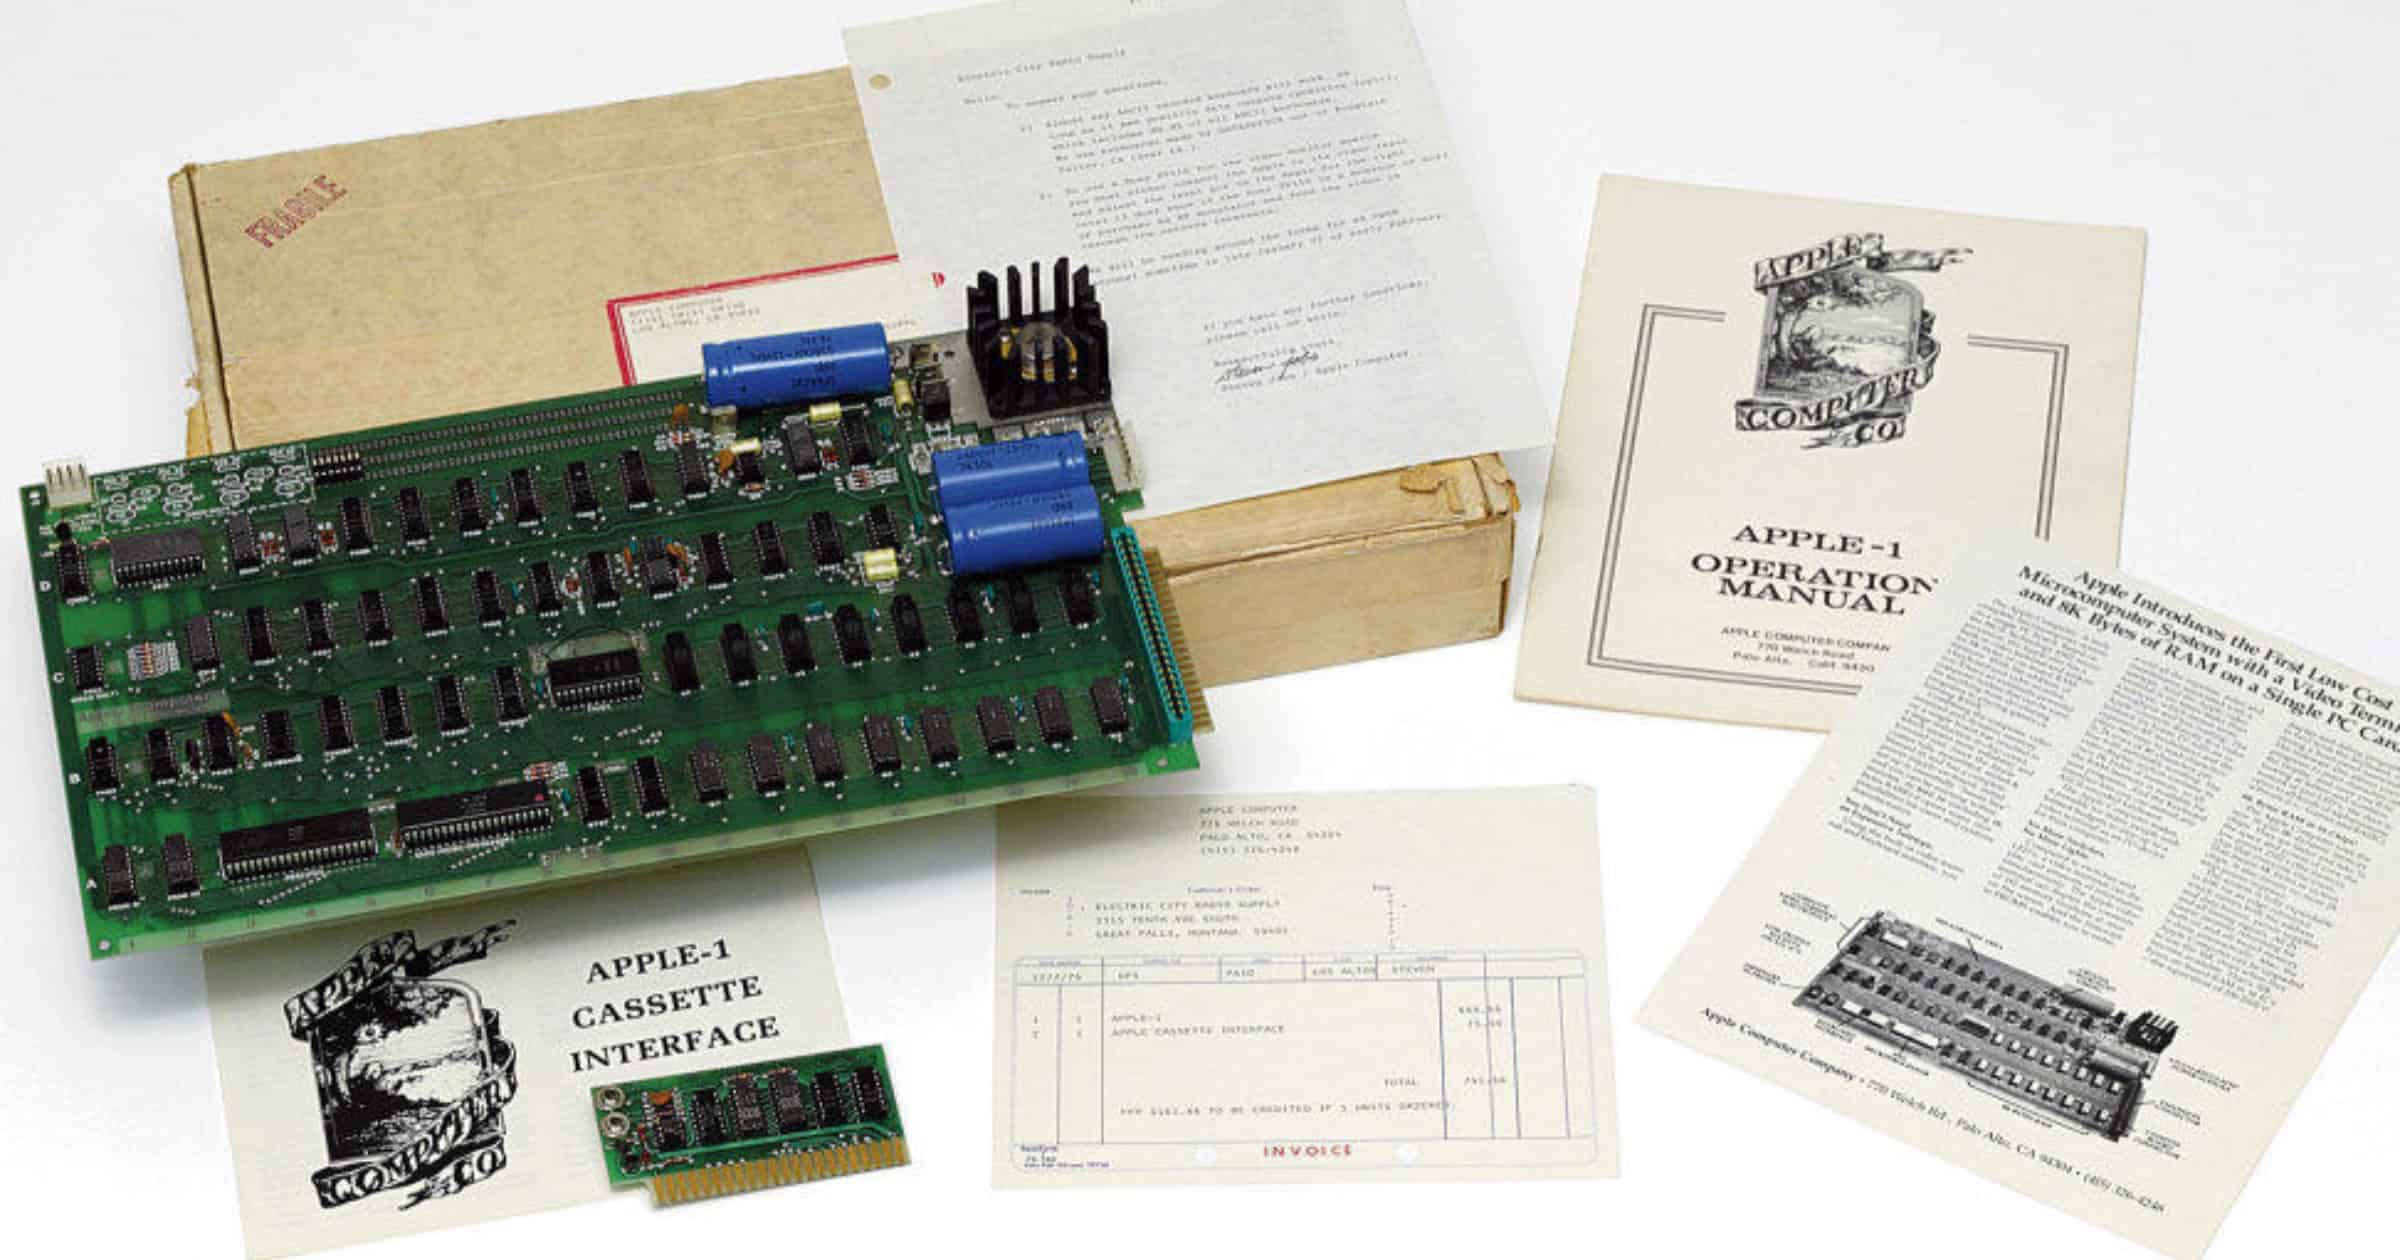 Apple-1 sold at Auction in 2010